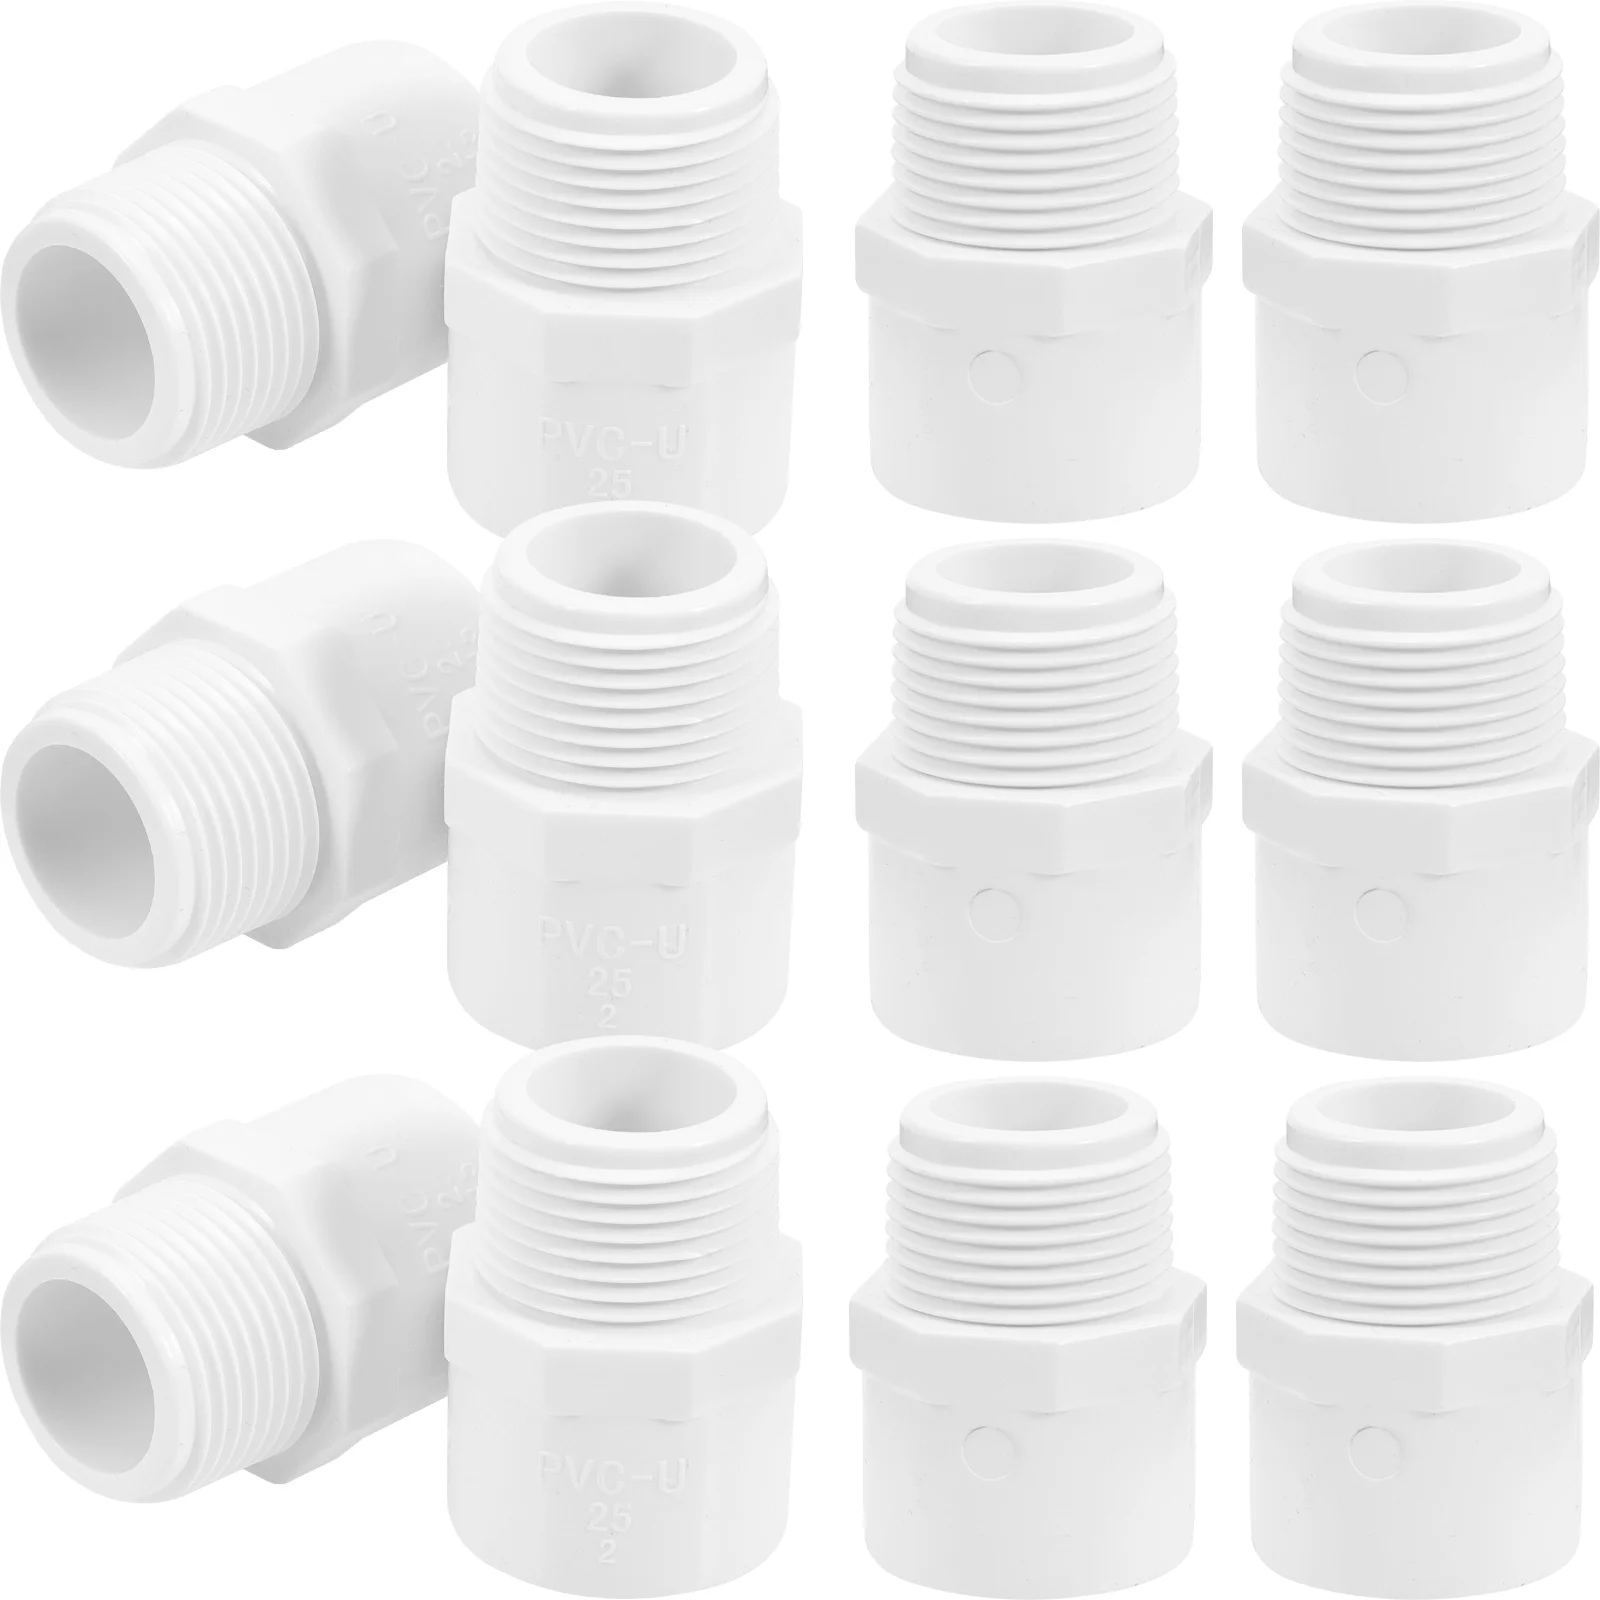 

Pvc Connector Fittings Fitting Connectors Support Structure Garden Shelf Adapter Thread Water Joint